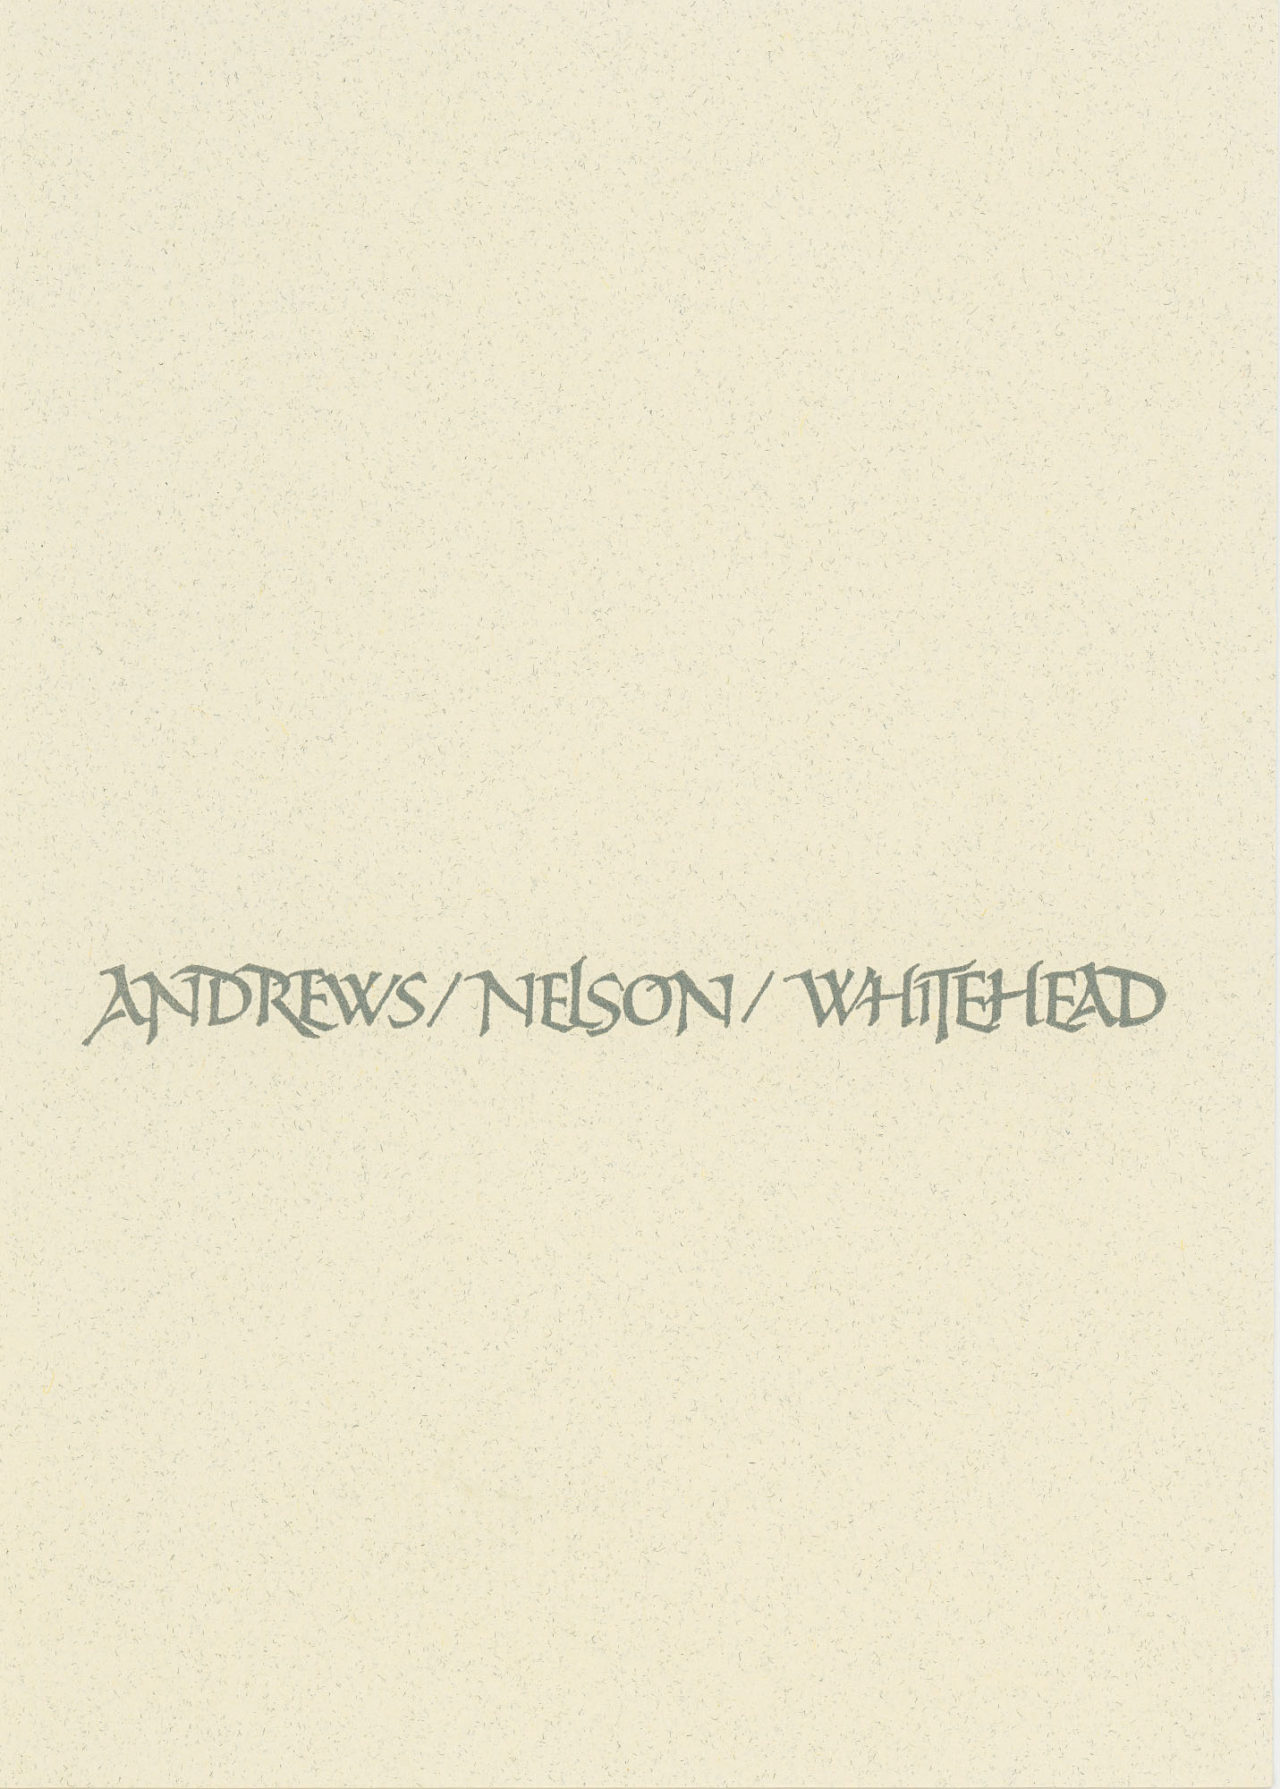 Andrews/Nelson/Whitehead greeting card inside